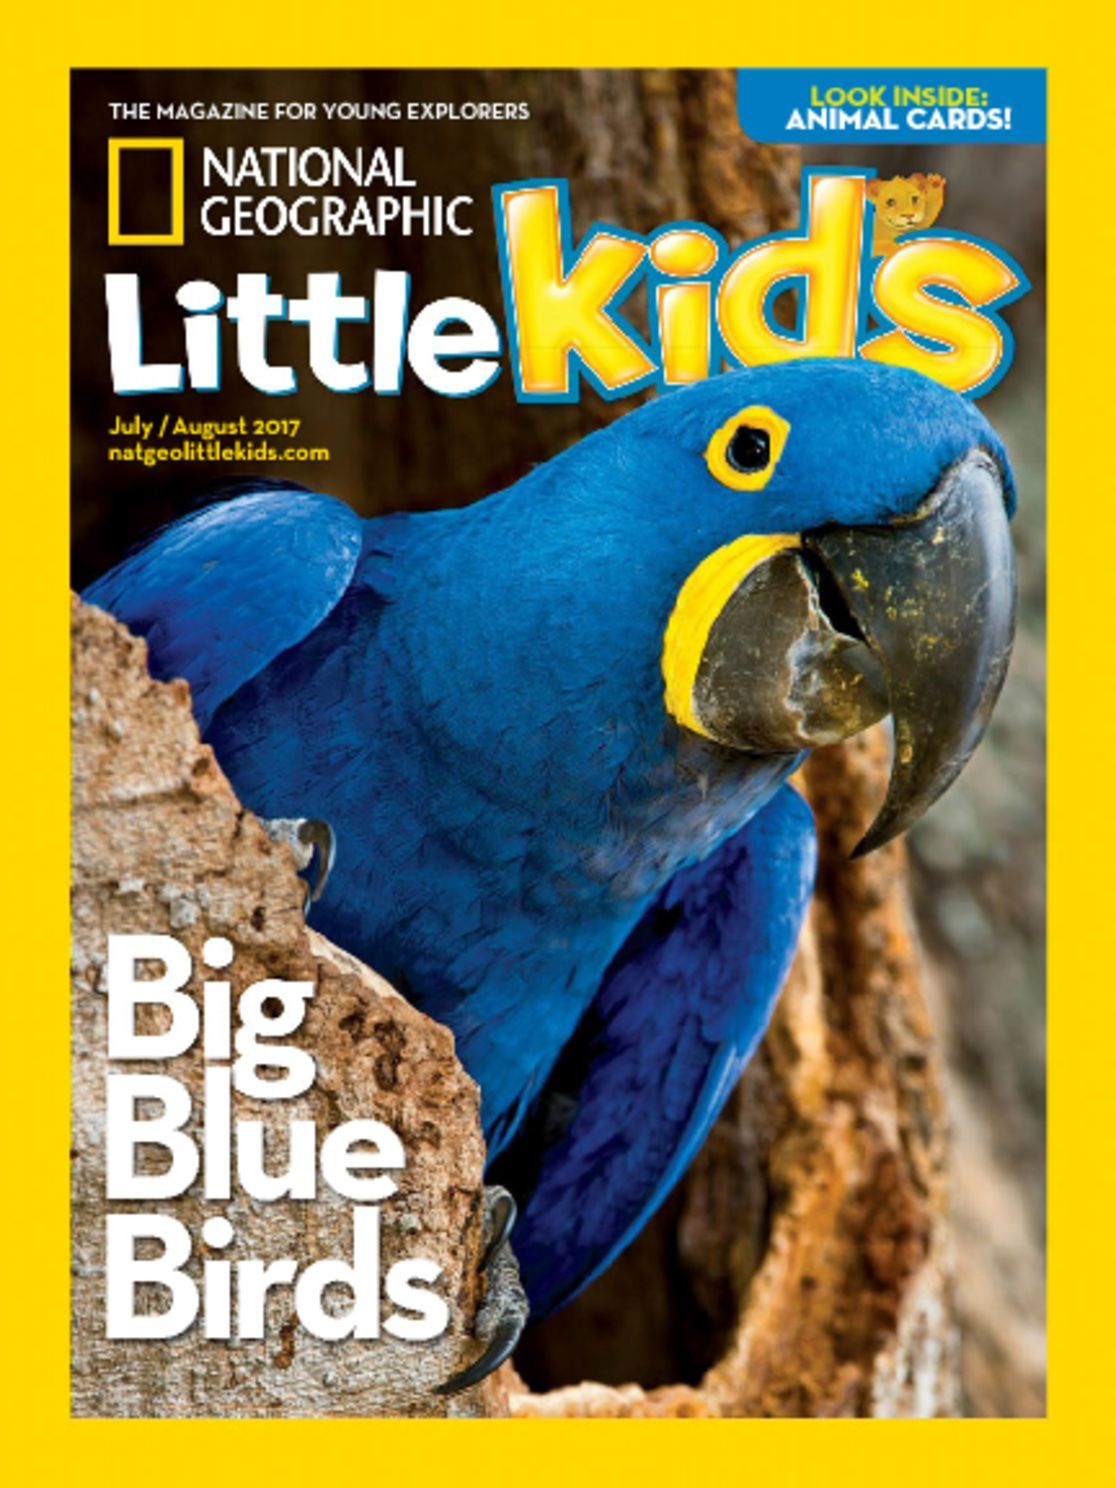 national-geographic-little-kids-magazine-discountmags